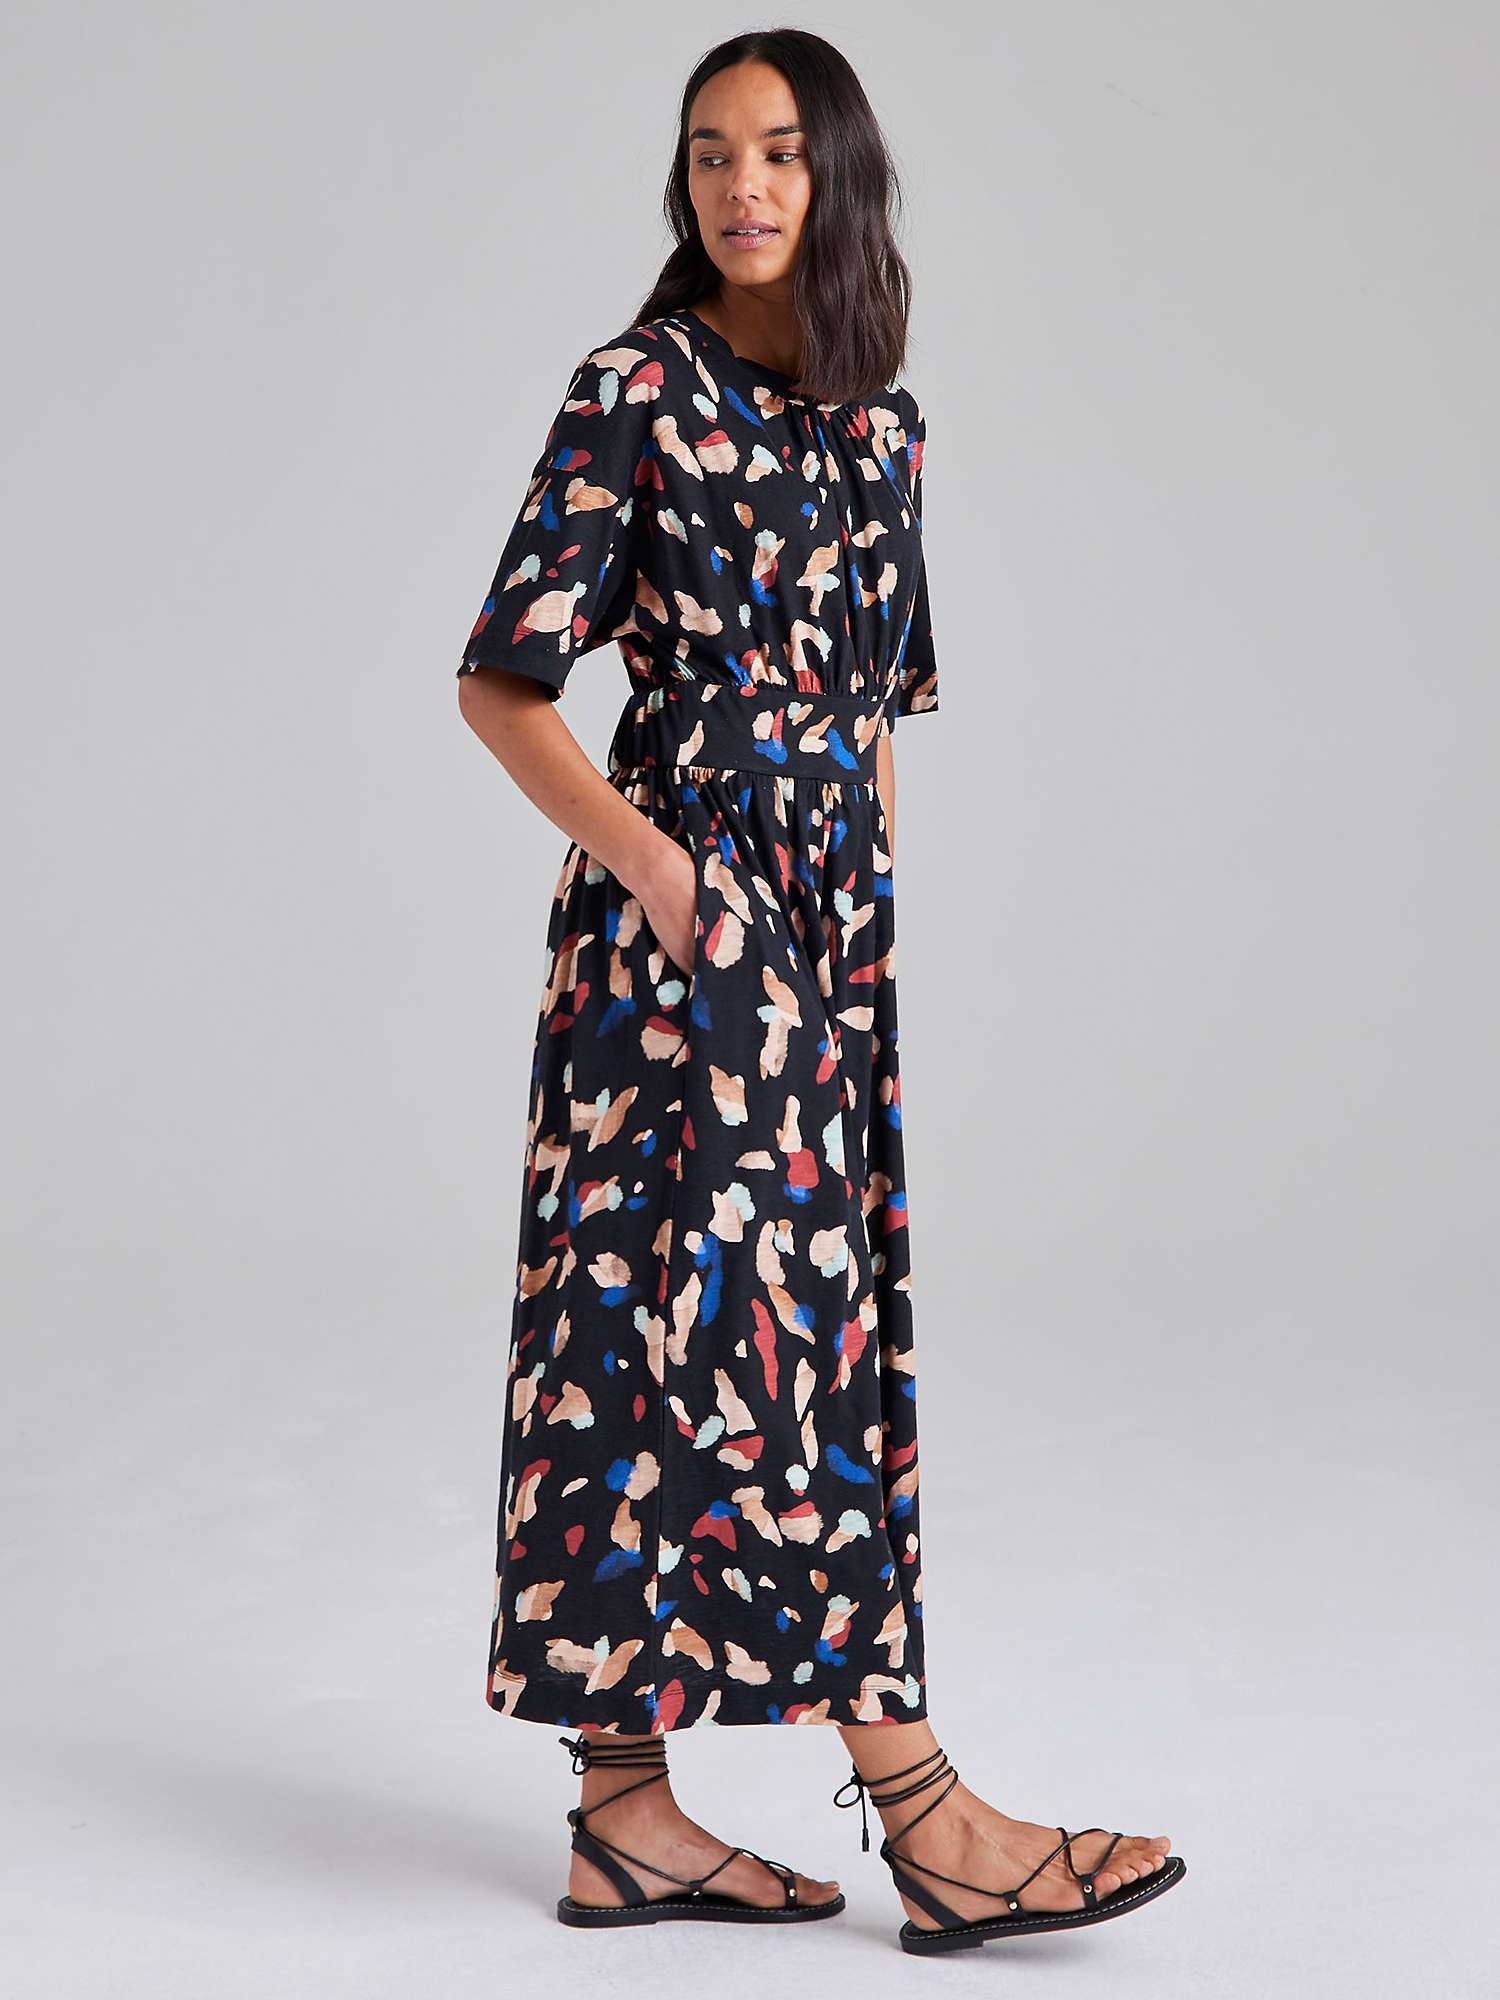 Buy Cape Cove Smugle Abstract Print Jersey Midi Dress, Black/Multi Online at johnlewis.com